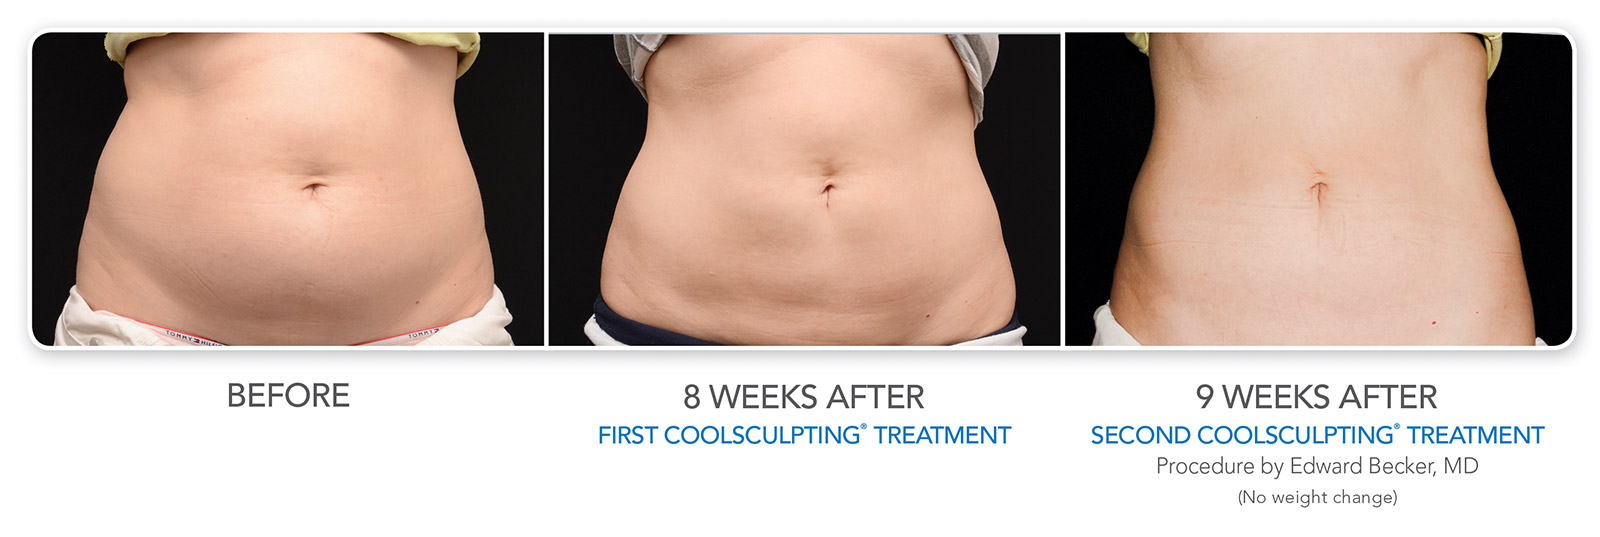 Three photos showing a patient's abdomen before, 8 weeks after 1 treatment, and 9 weeks after 2 CoolSculpting treatments